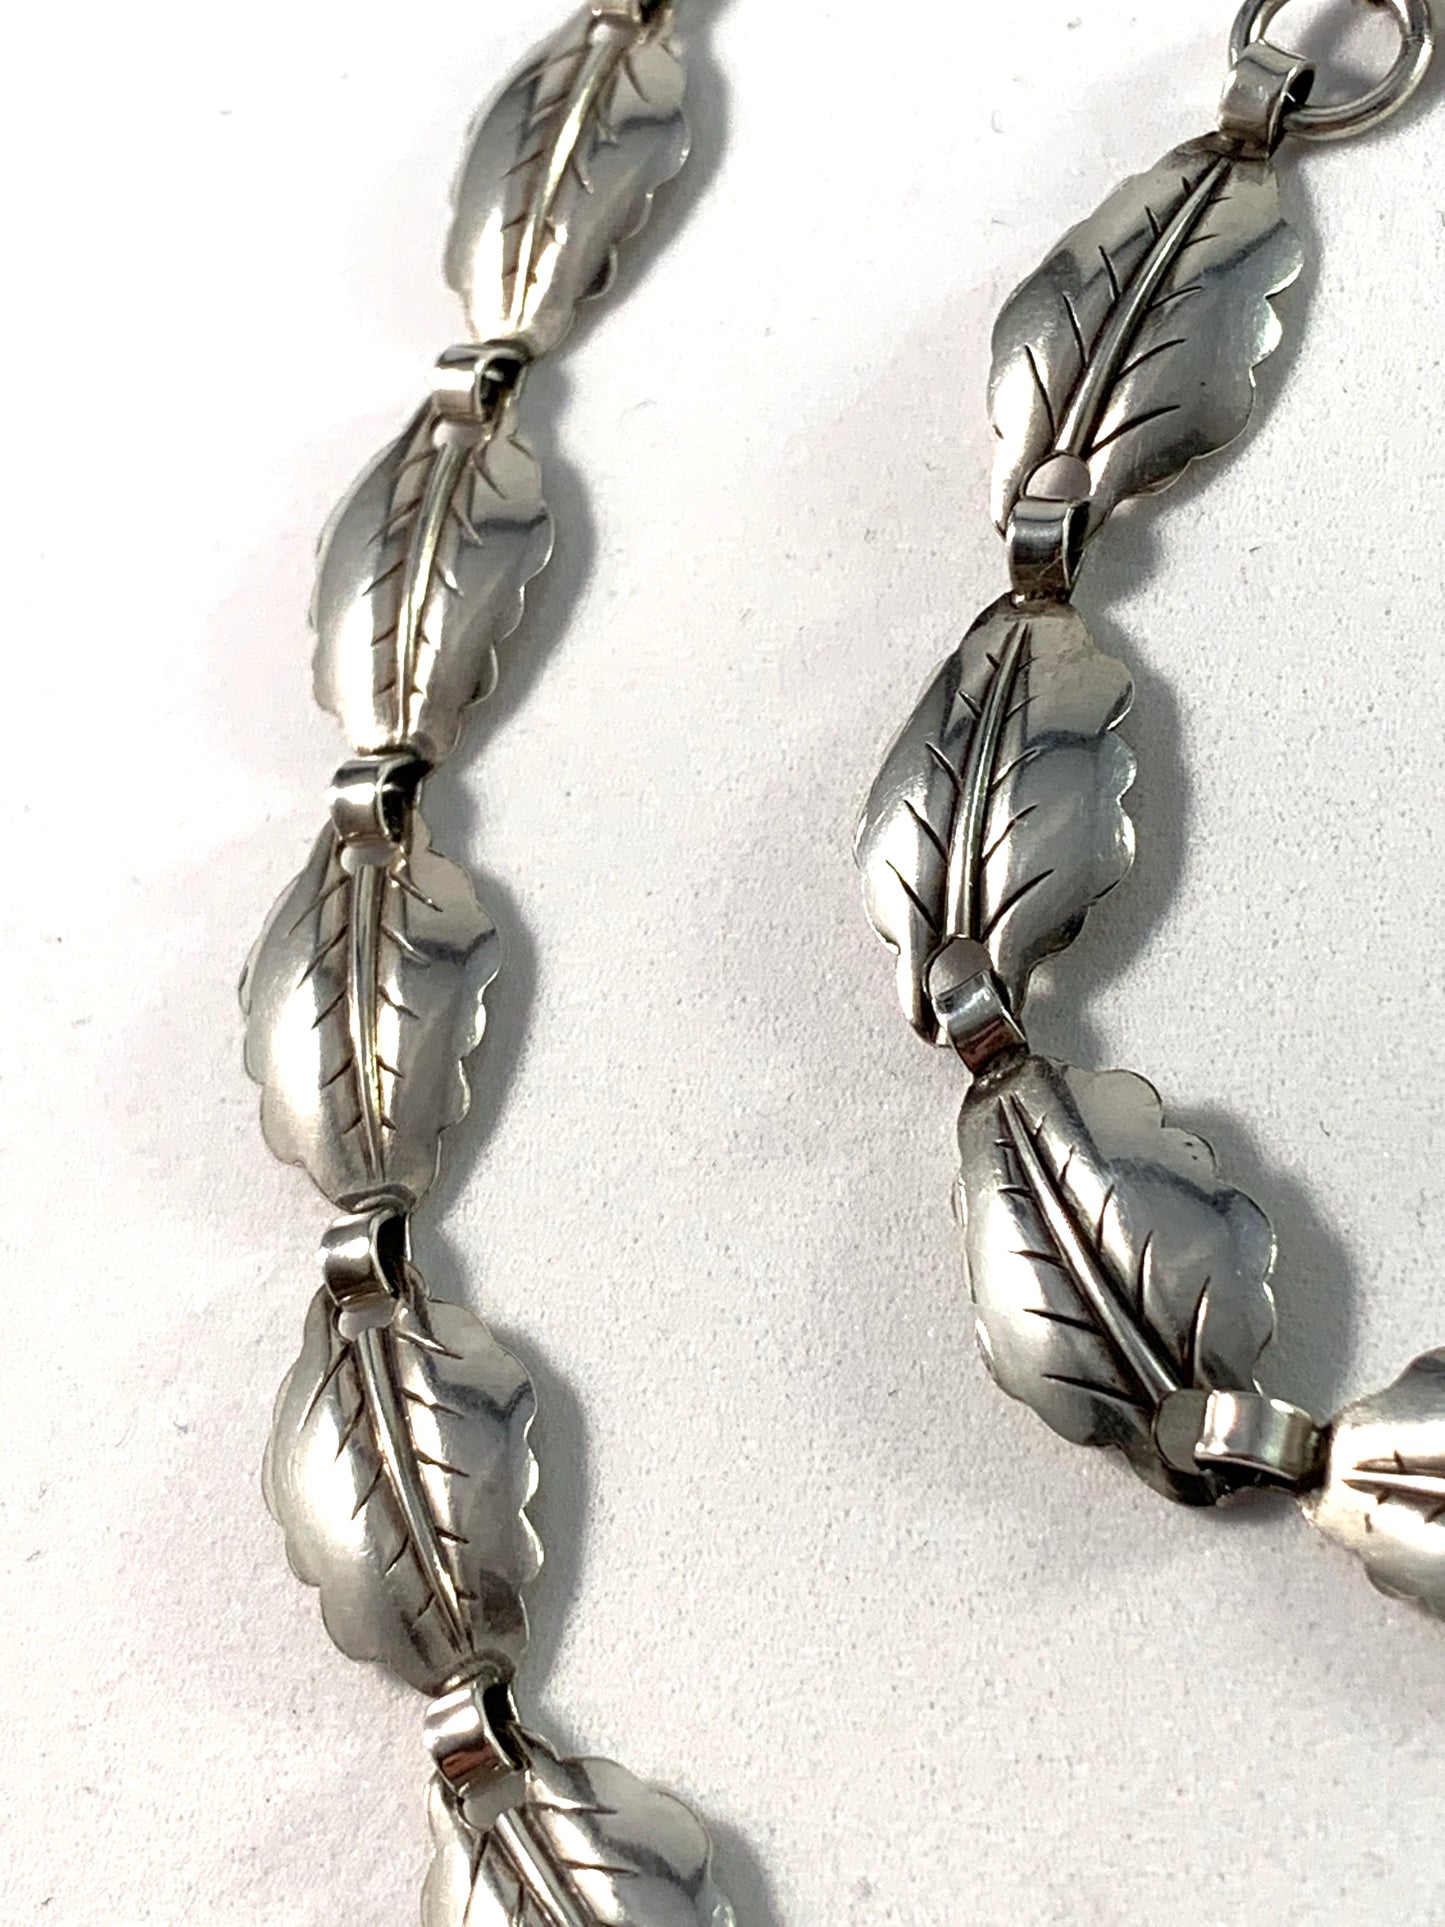 Swedish Import c 1950s Mid Century Solid Silver Set. Necklace and Bracelet.